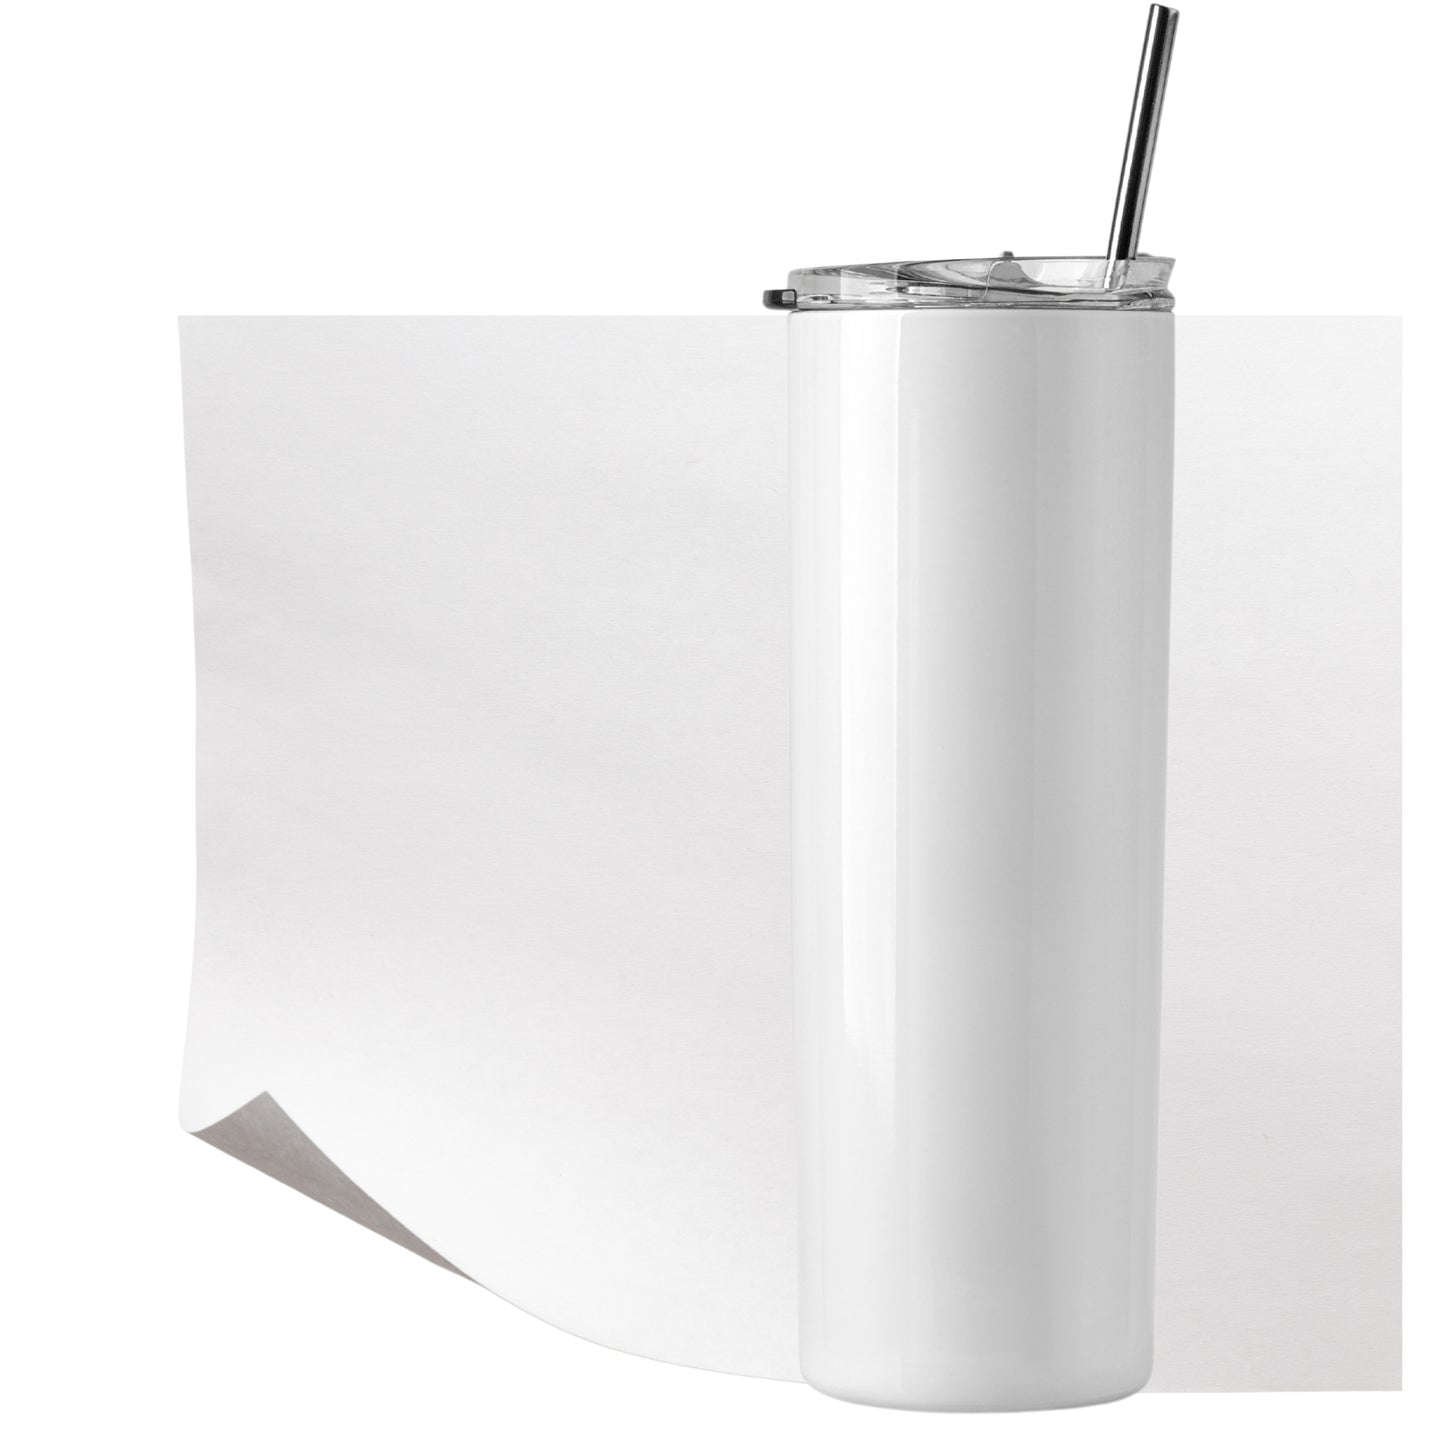 Butcher Paper for Sublimation Printing  Everything You need to Know (2024)  - Digifyprint